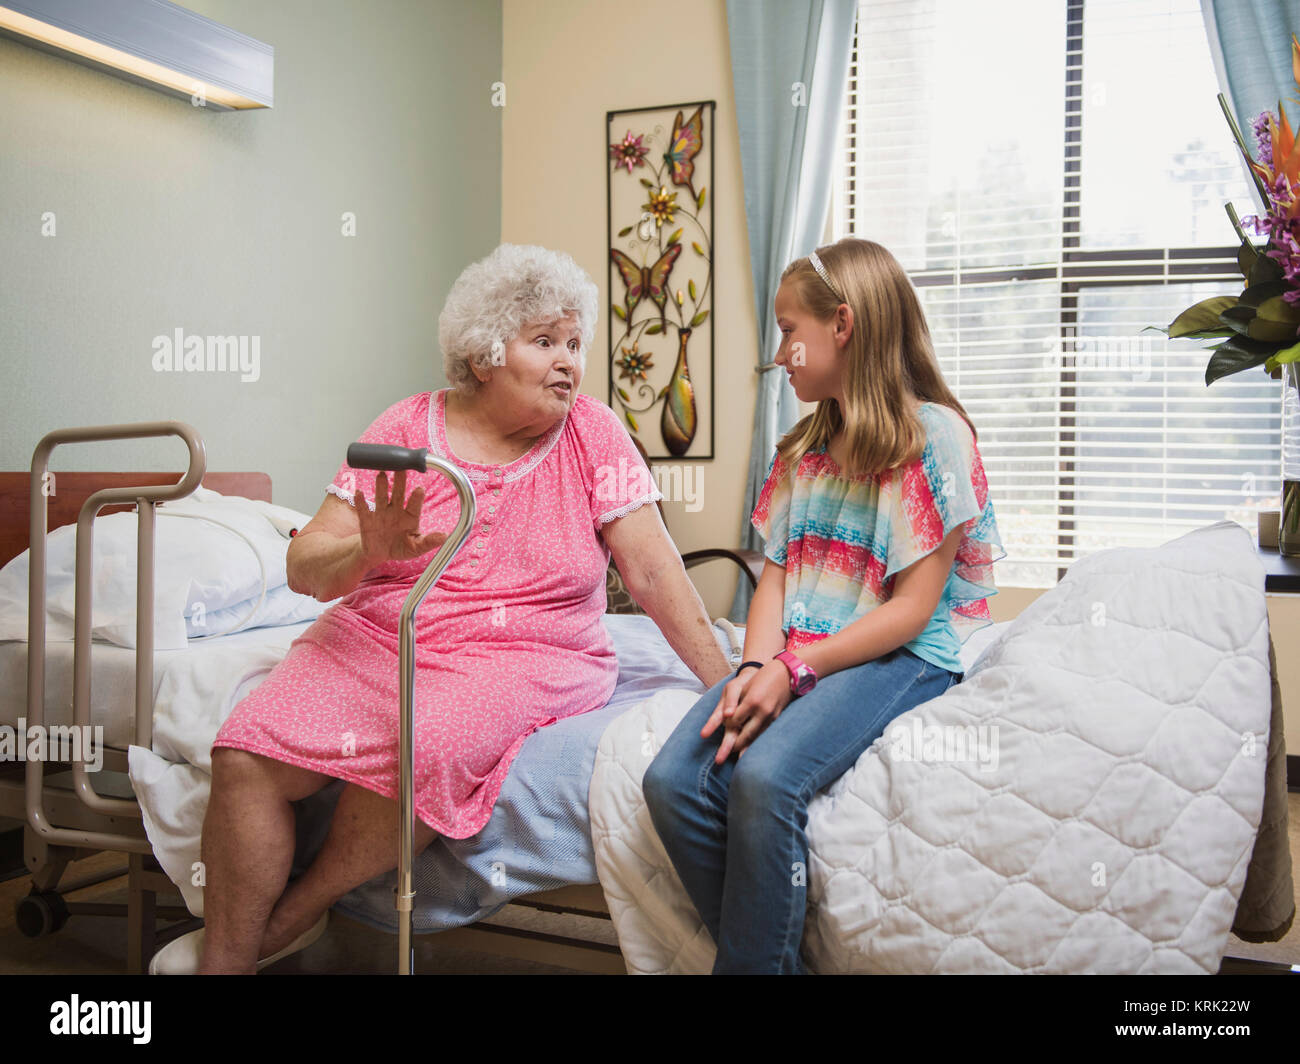 Smiling Caucasian woman sitting on bed talking to granddaughter Stock Photo